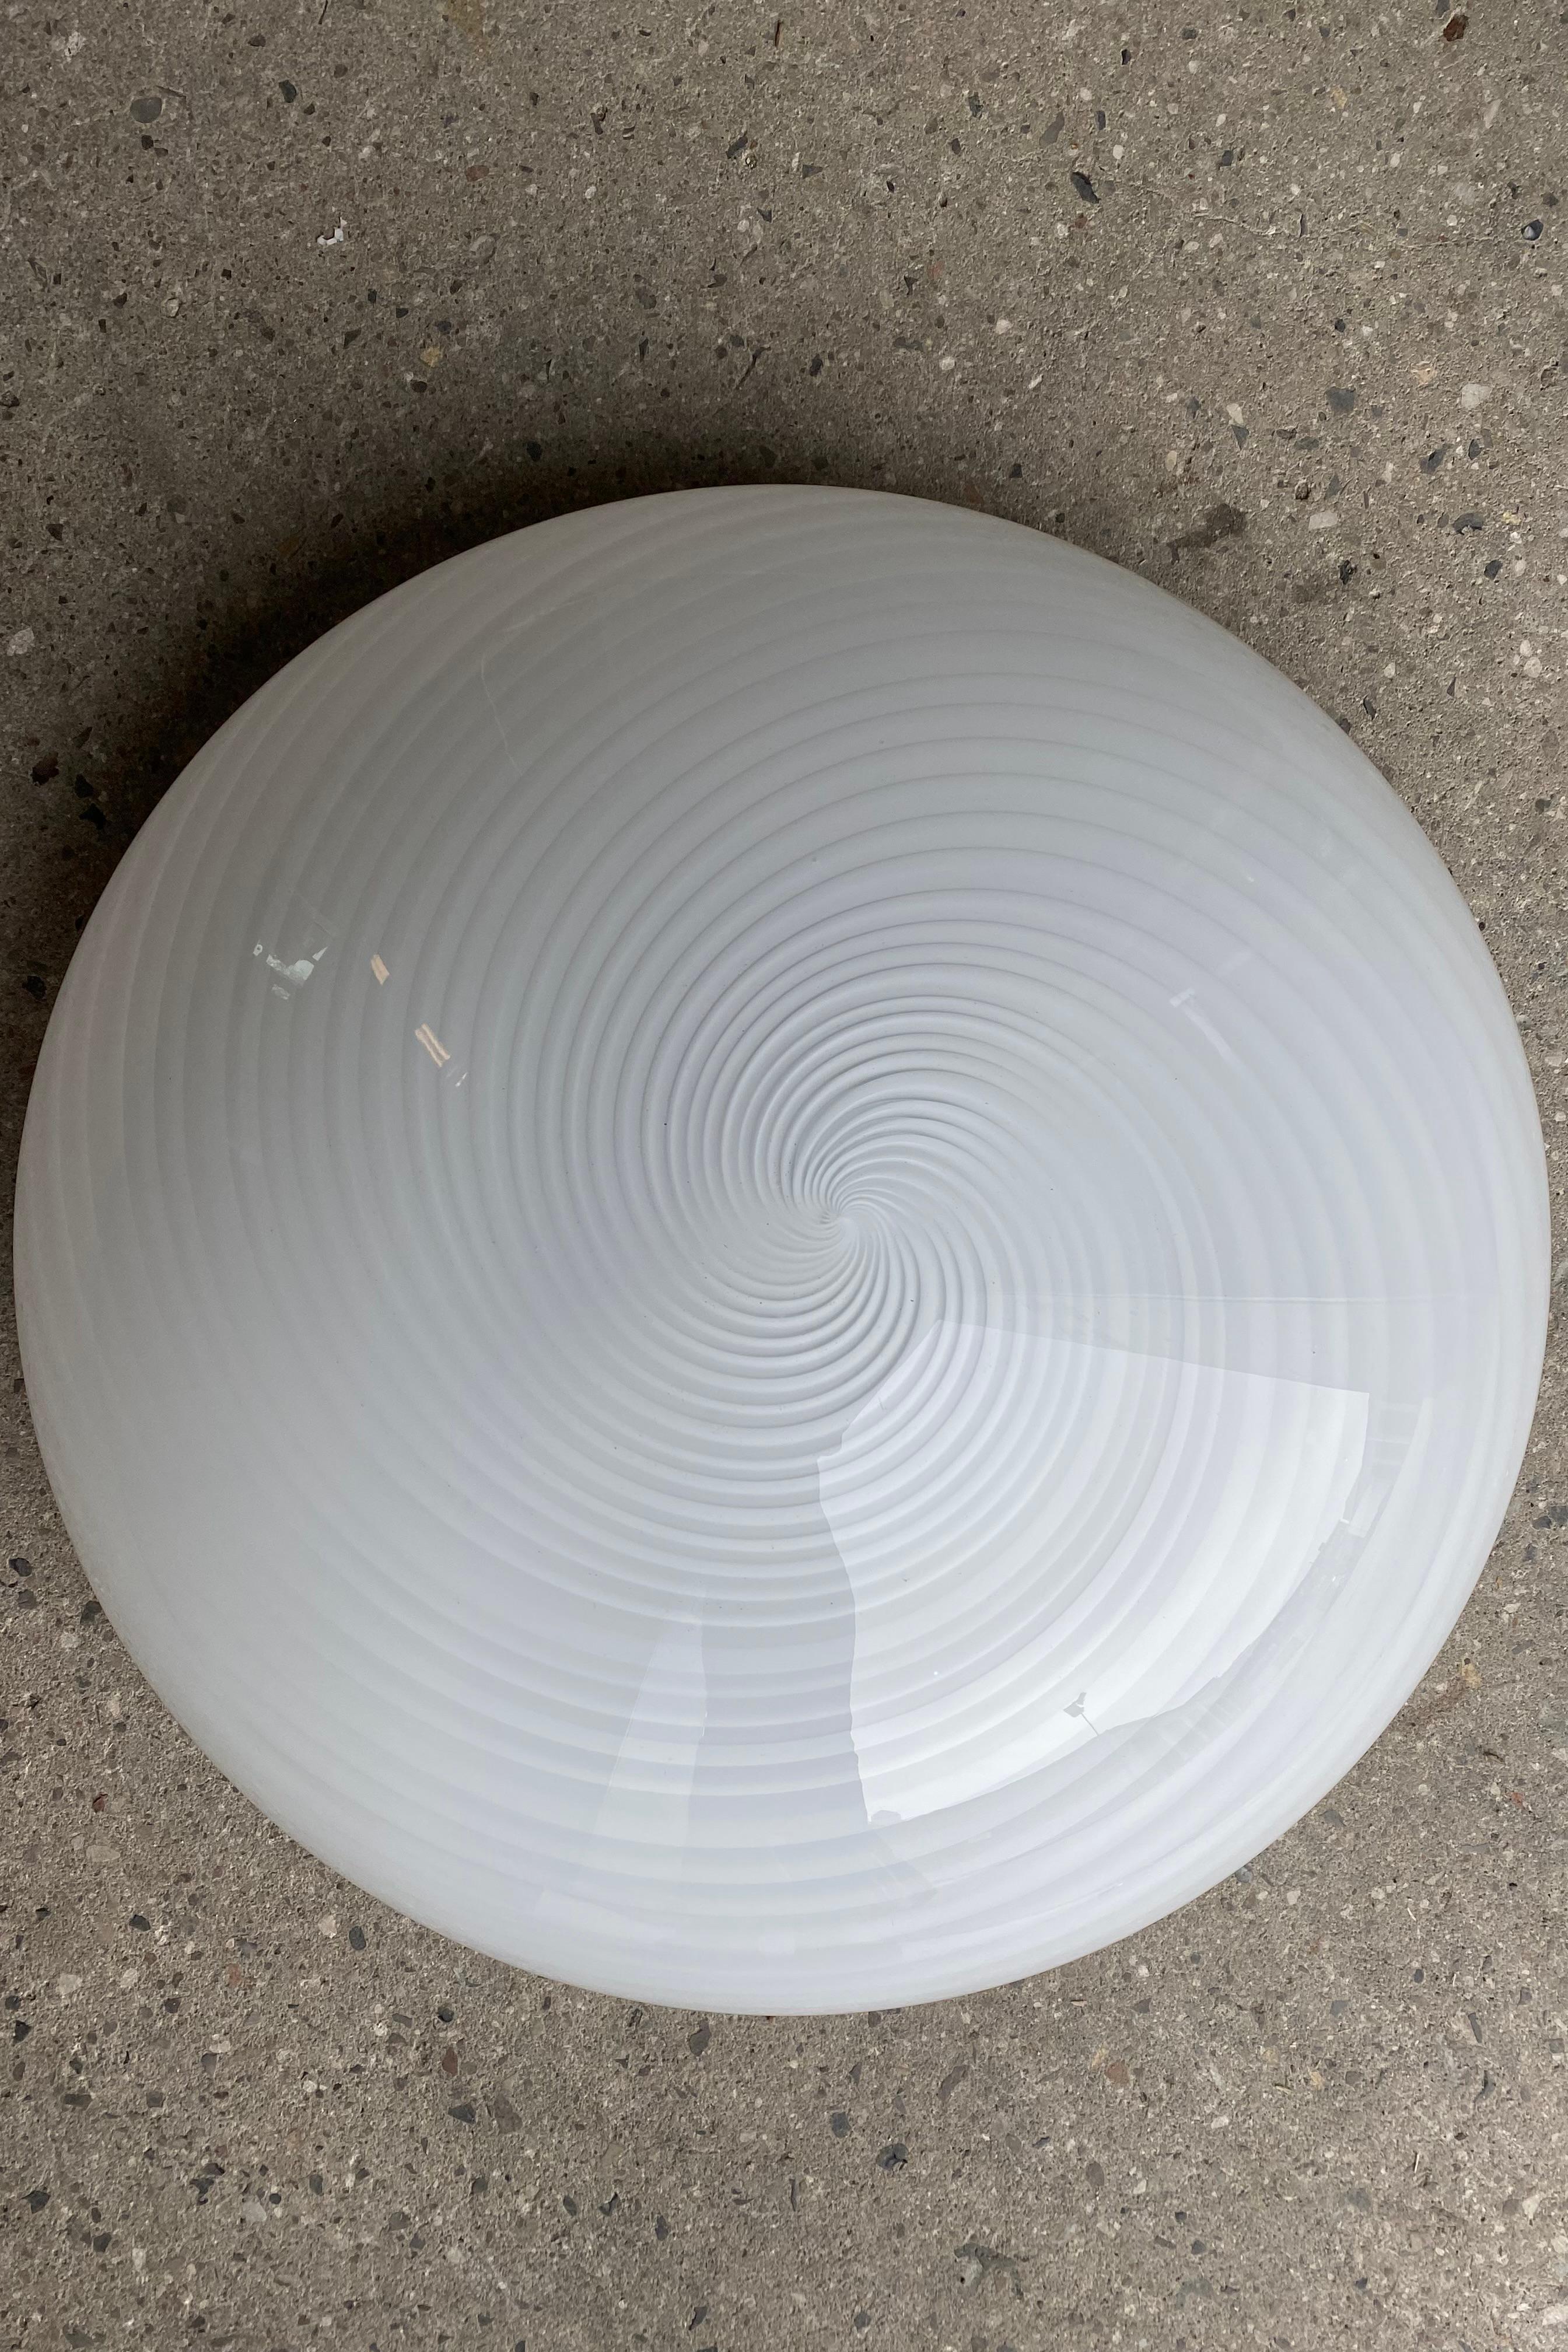 Vintage Murano plafond ceiling lamp / wall lamp. Mouth-blown white opaline glass with swirl and white base. E27 socket. Handmade in Italy, 1970s.
D:48 cm⁠⁠ H:21 cm
